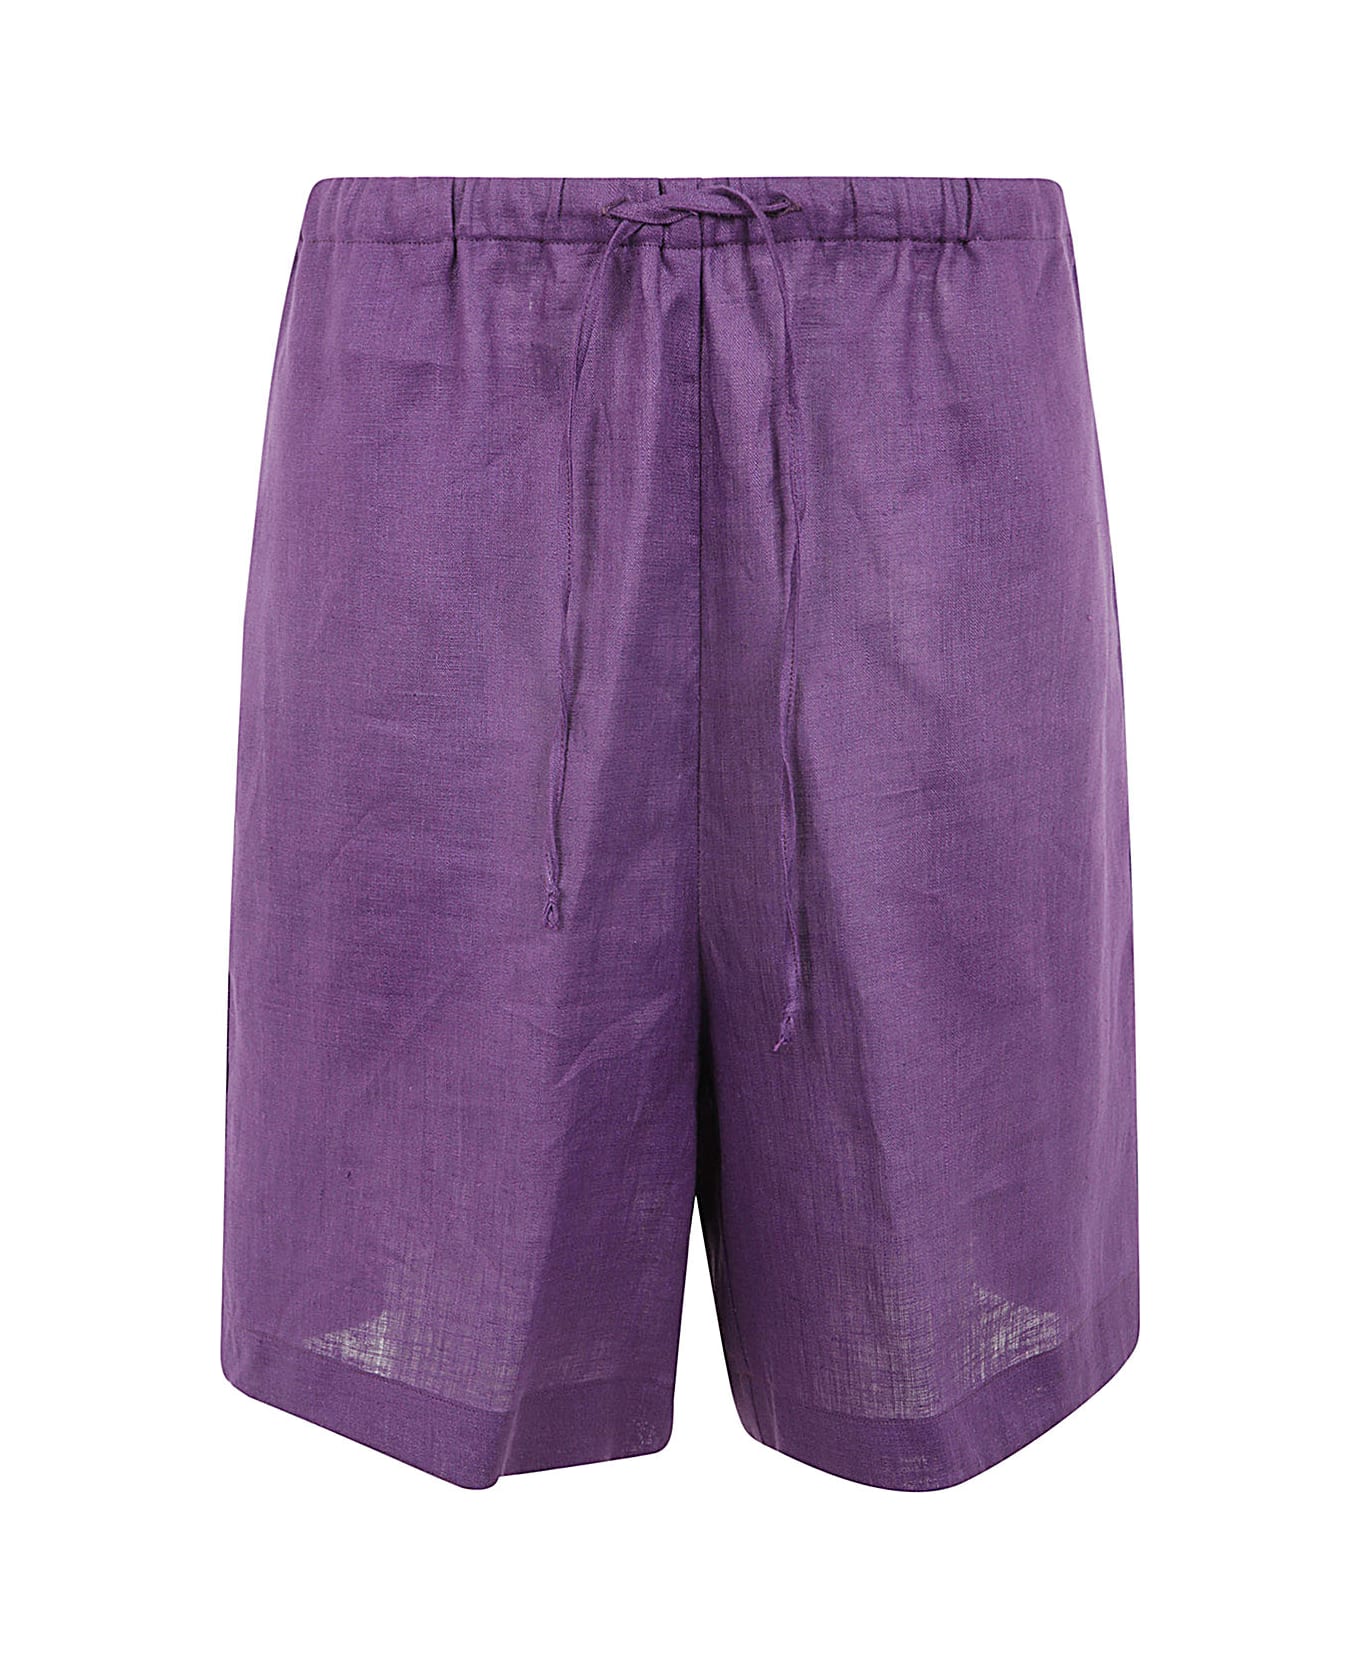 Liviana Conti Coulisse Shorts - Berry